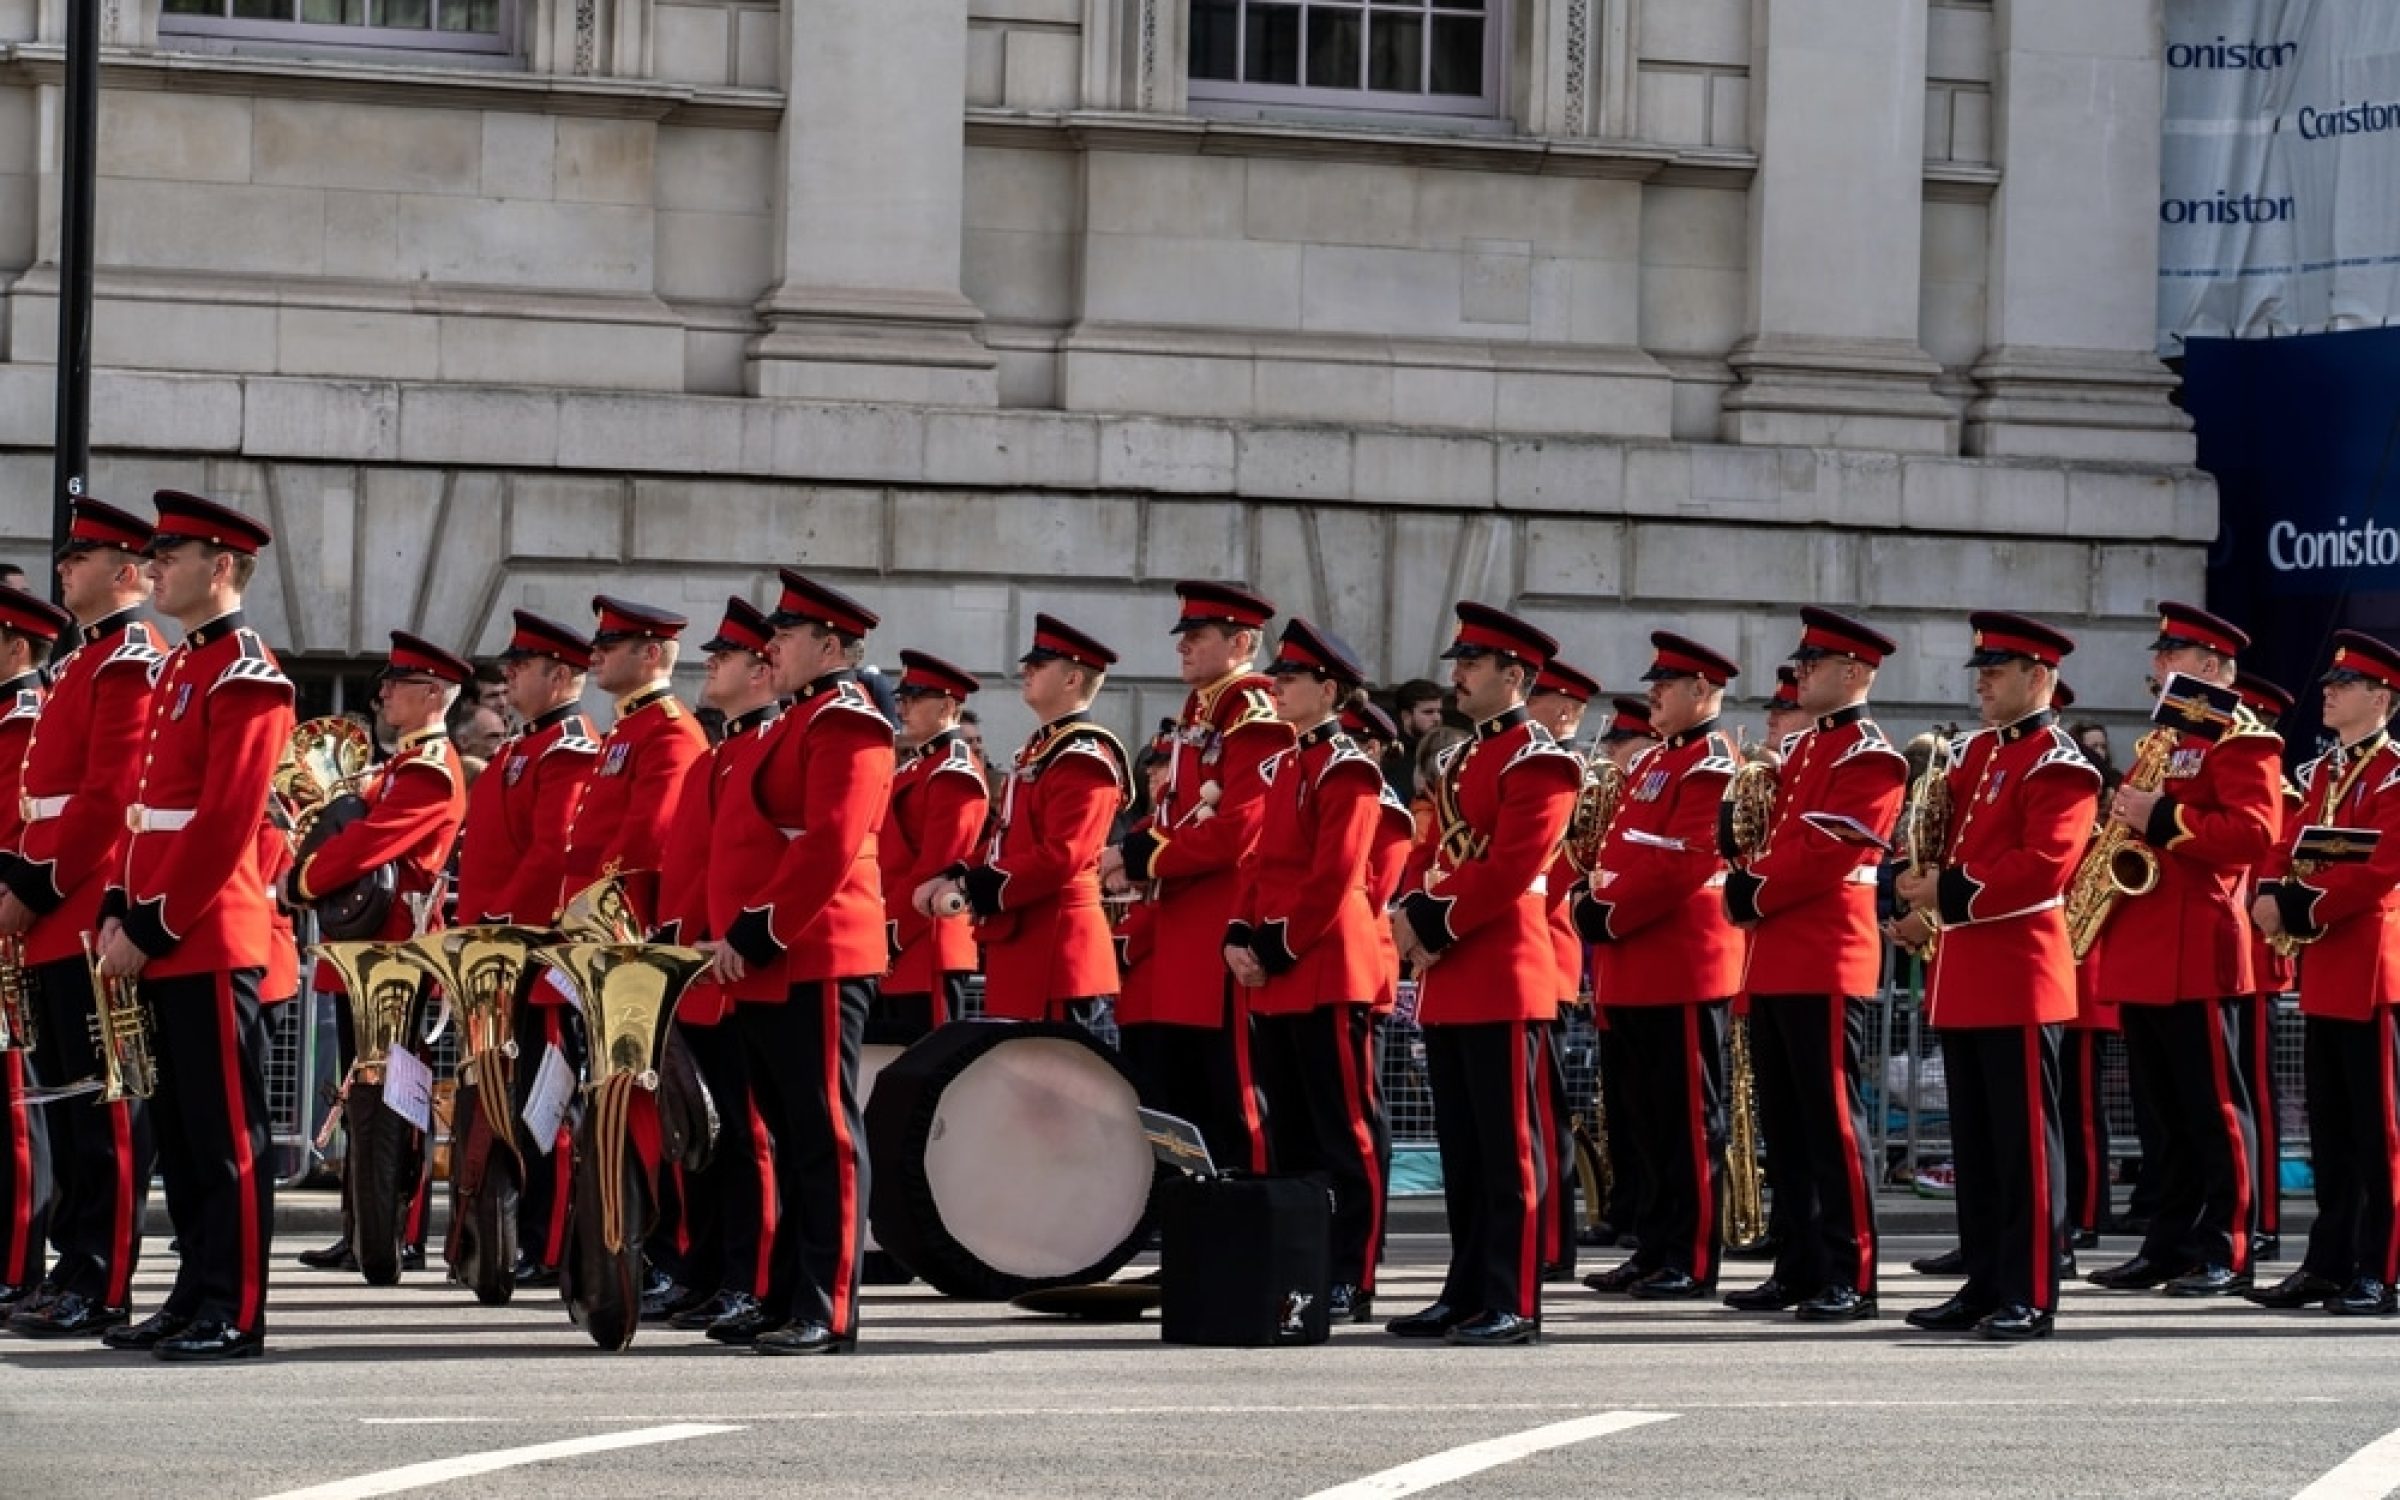 London, United Kingdom - September 19, 2022: The procession of Queen Elizabeth II in London, the royal family, royal guards, police, horses, Britain armed forces